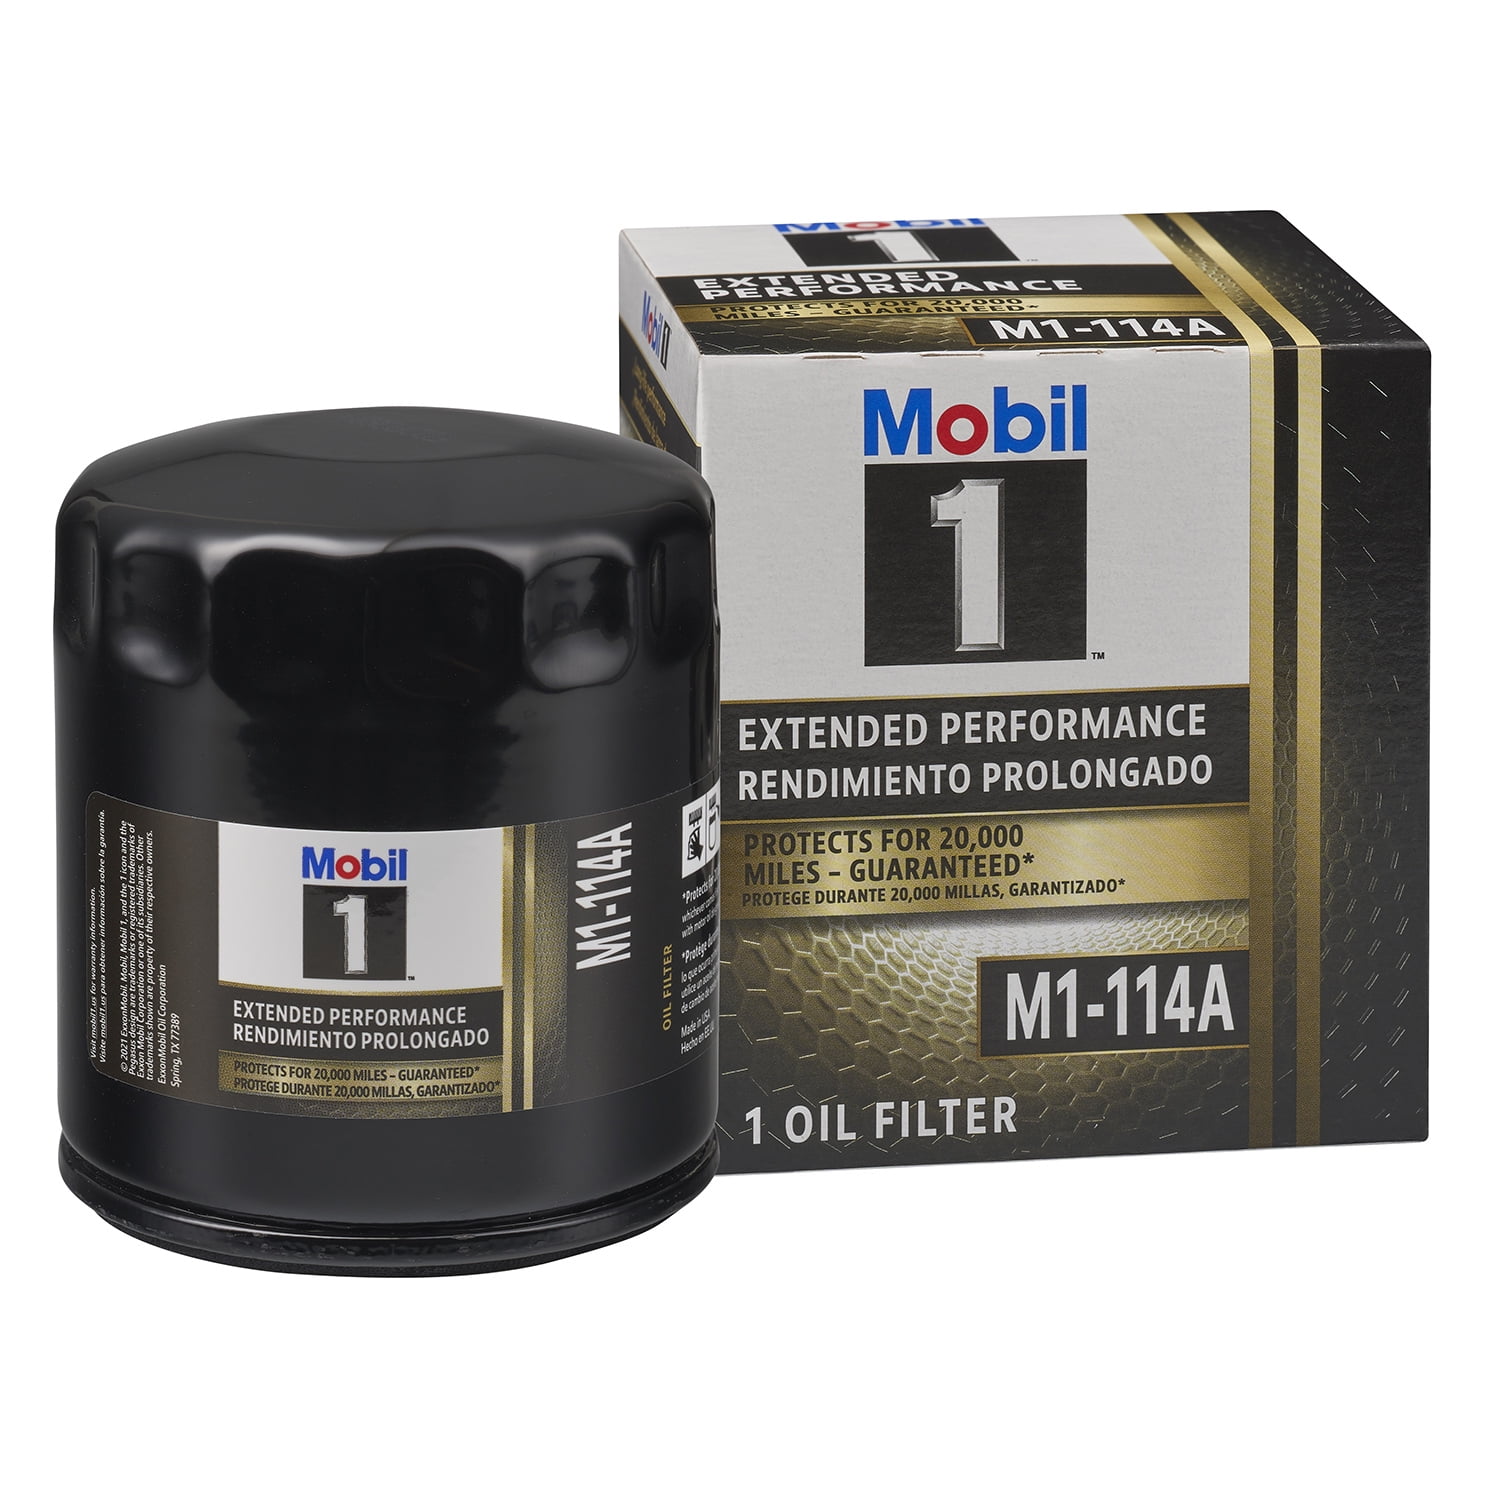 mobil-1-extended-performance-m1-114a-oil-filter-walmart